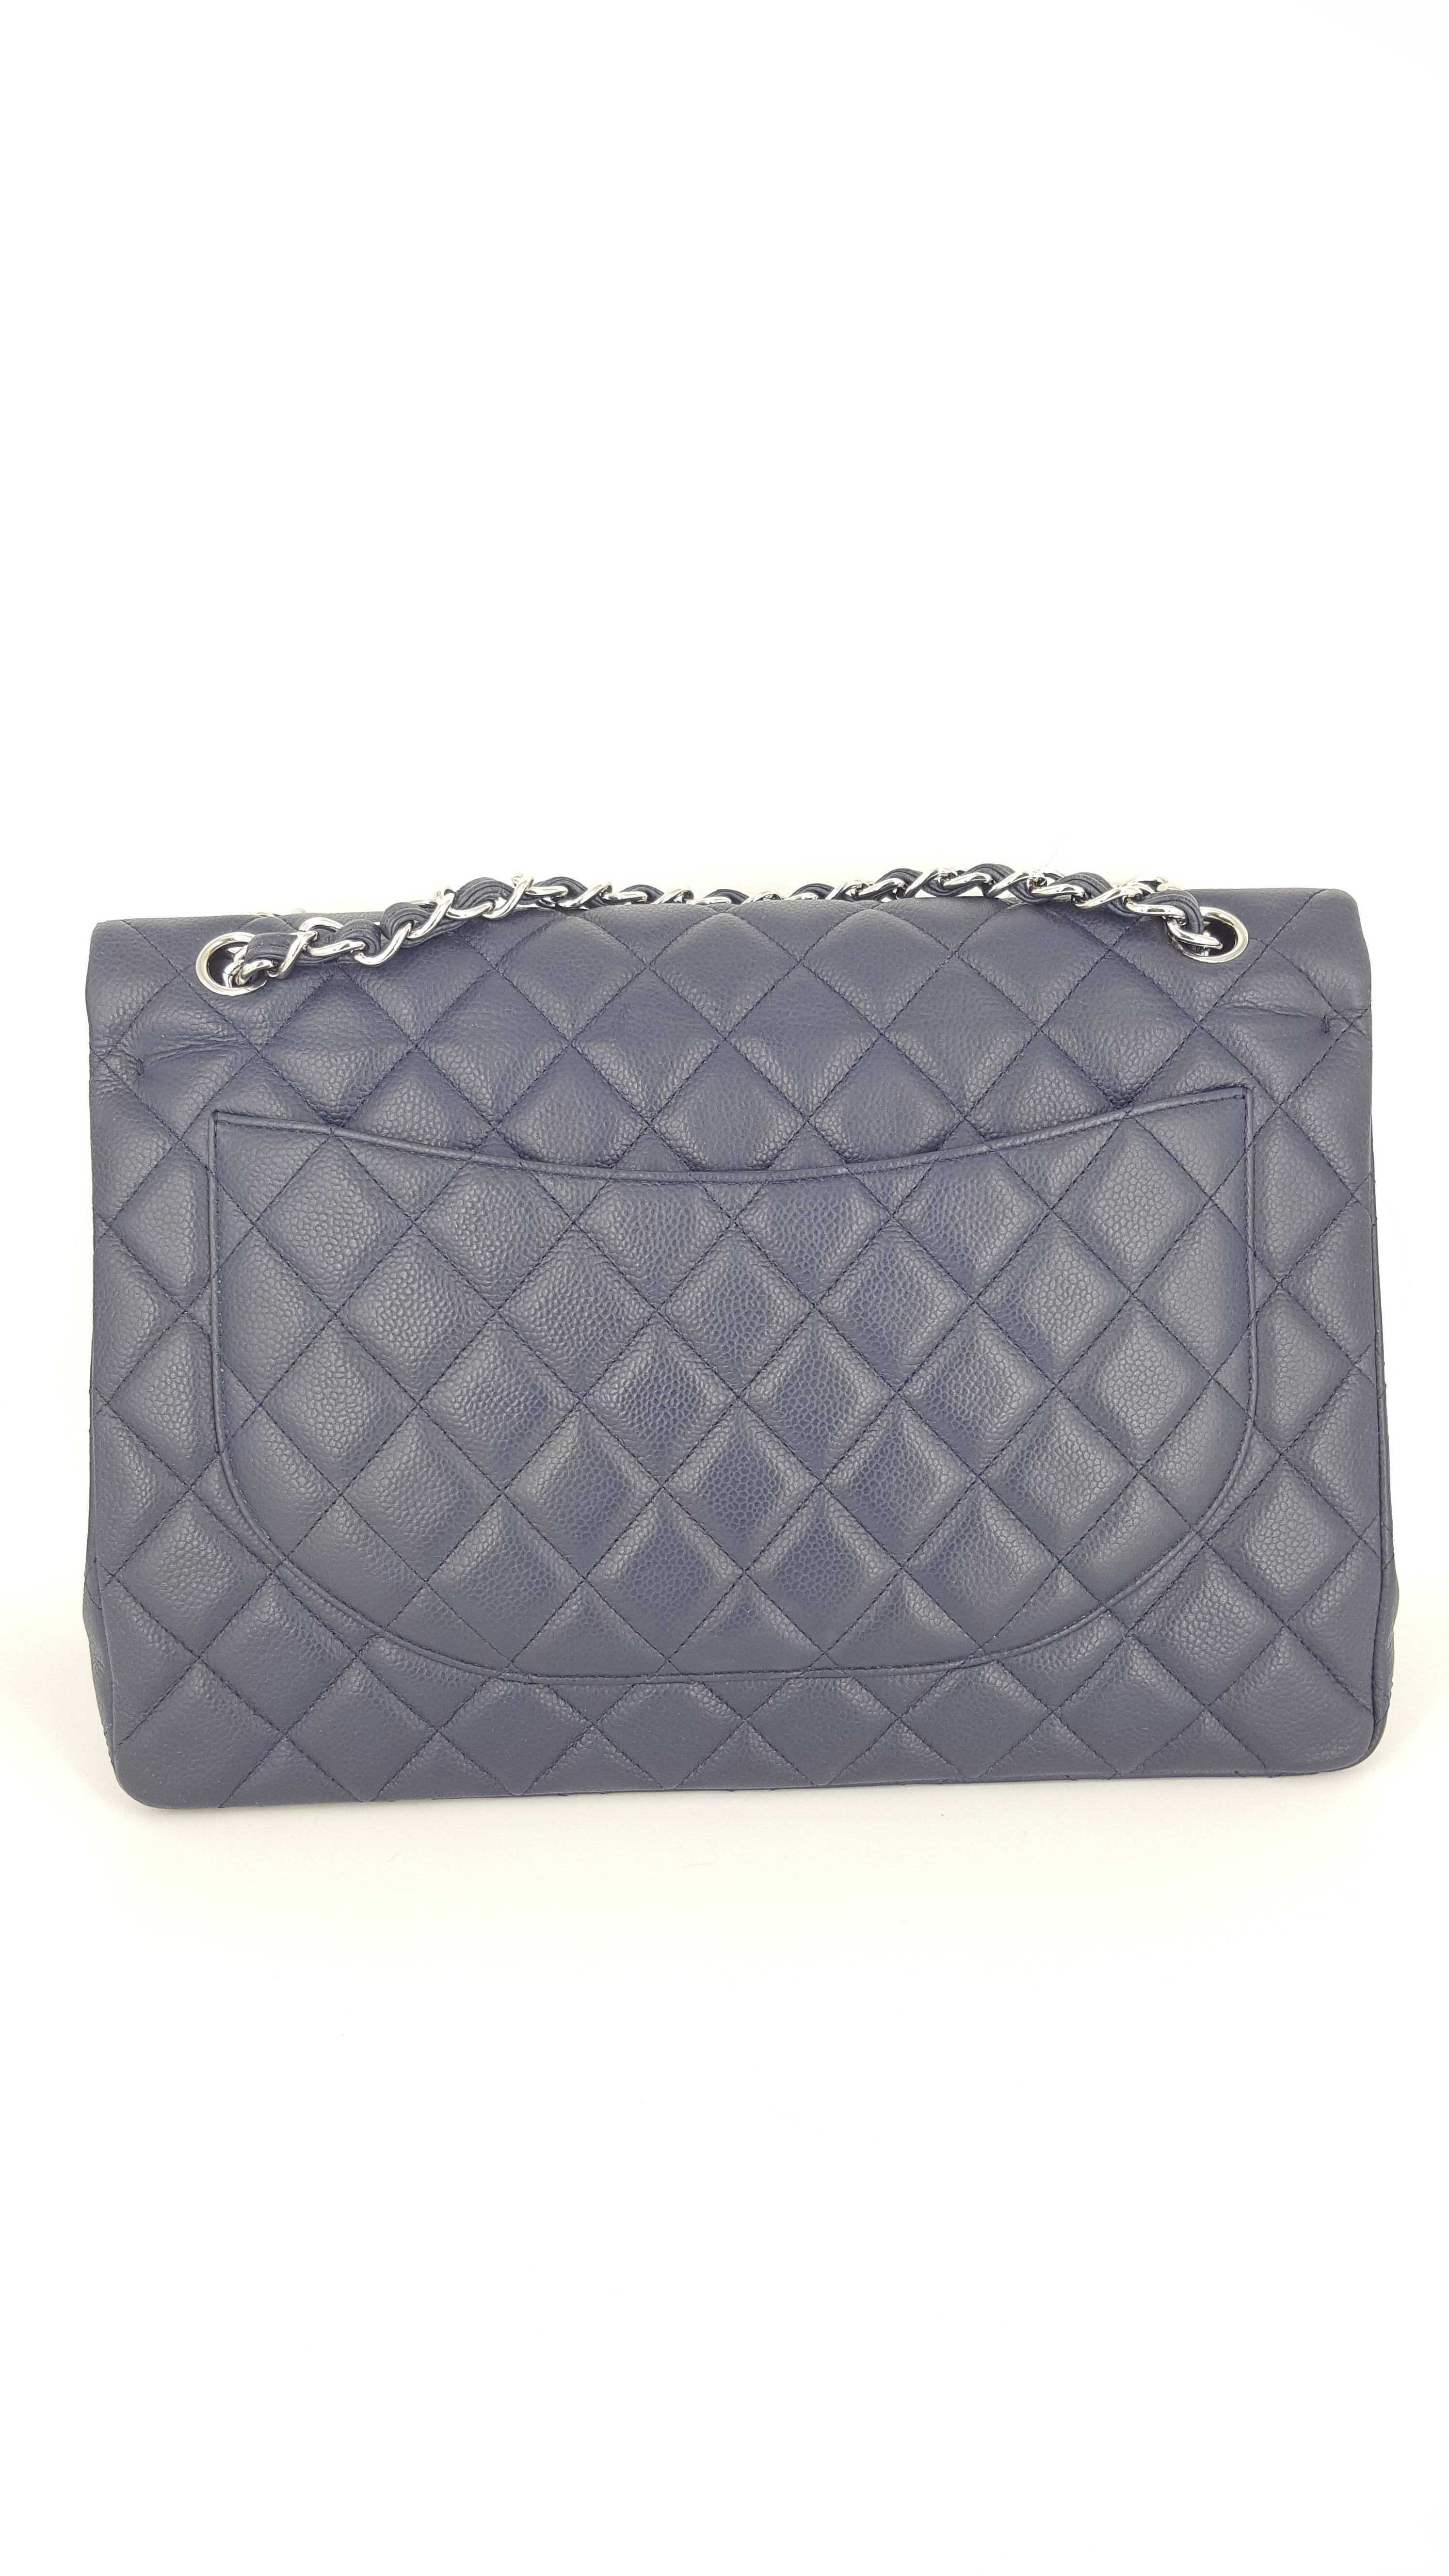 Offered for sale is this beautiful navy blue Chanel Maxi double flap in caviar with silver hardware.  This bag was manufactured in Italy in 2011 and is in excellent condition.  It measures 13